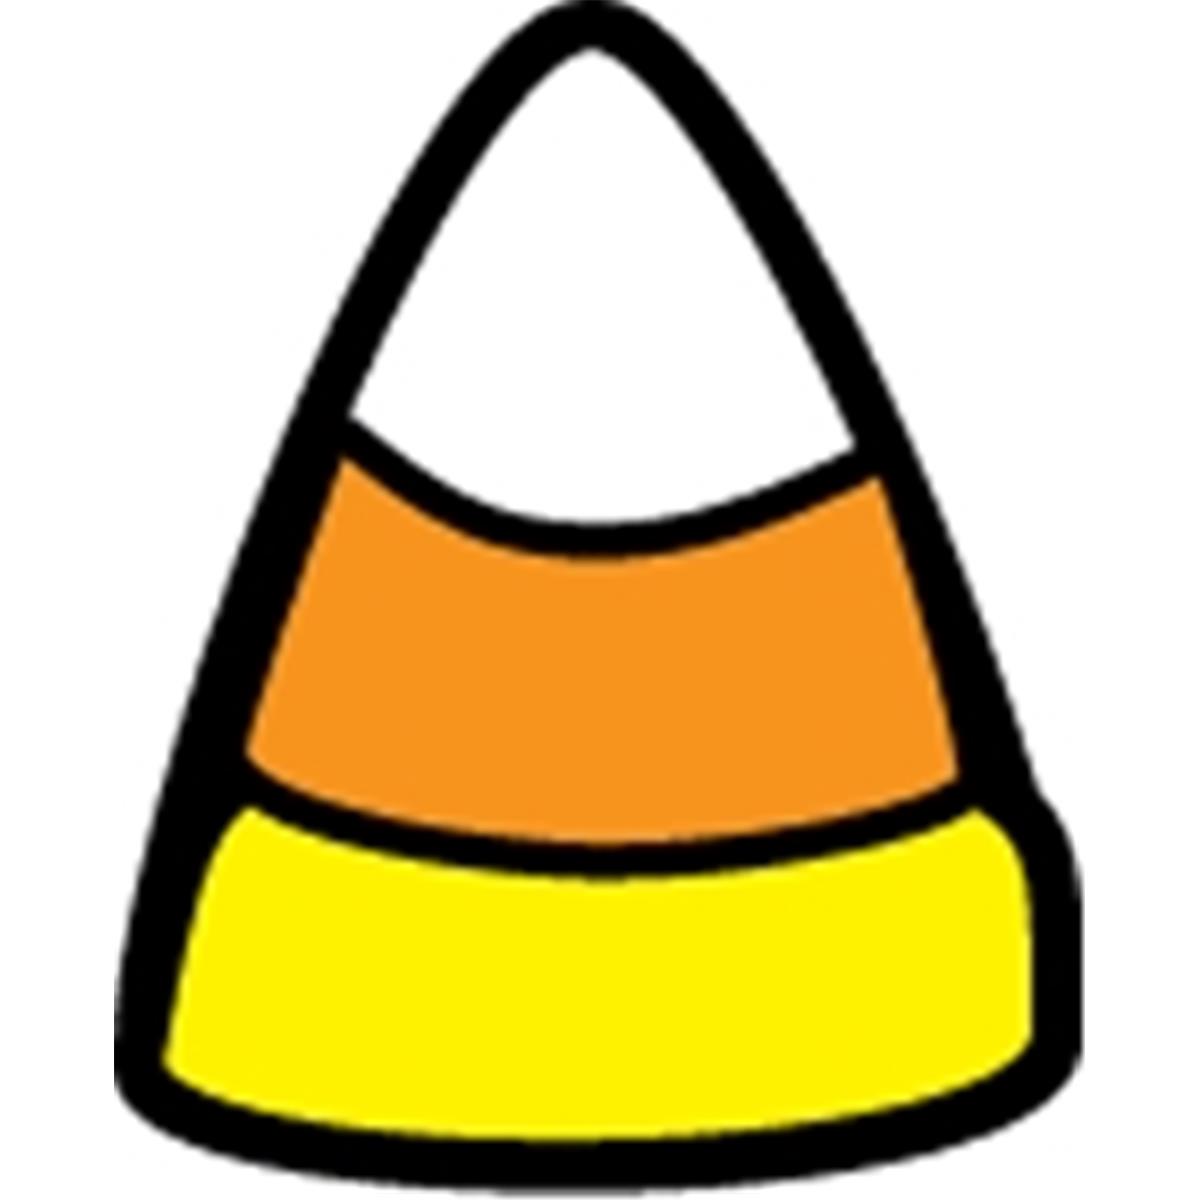 Picture of Creative Shapes Etc SE-0471 0.5 x 0.5 in. Incentive Stamp - Candy Corn